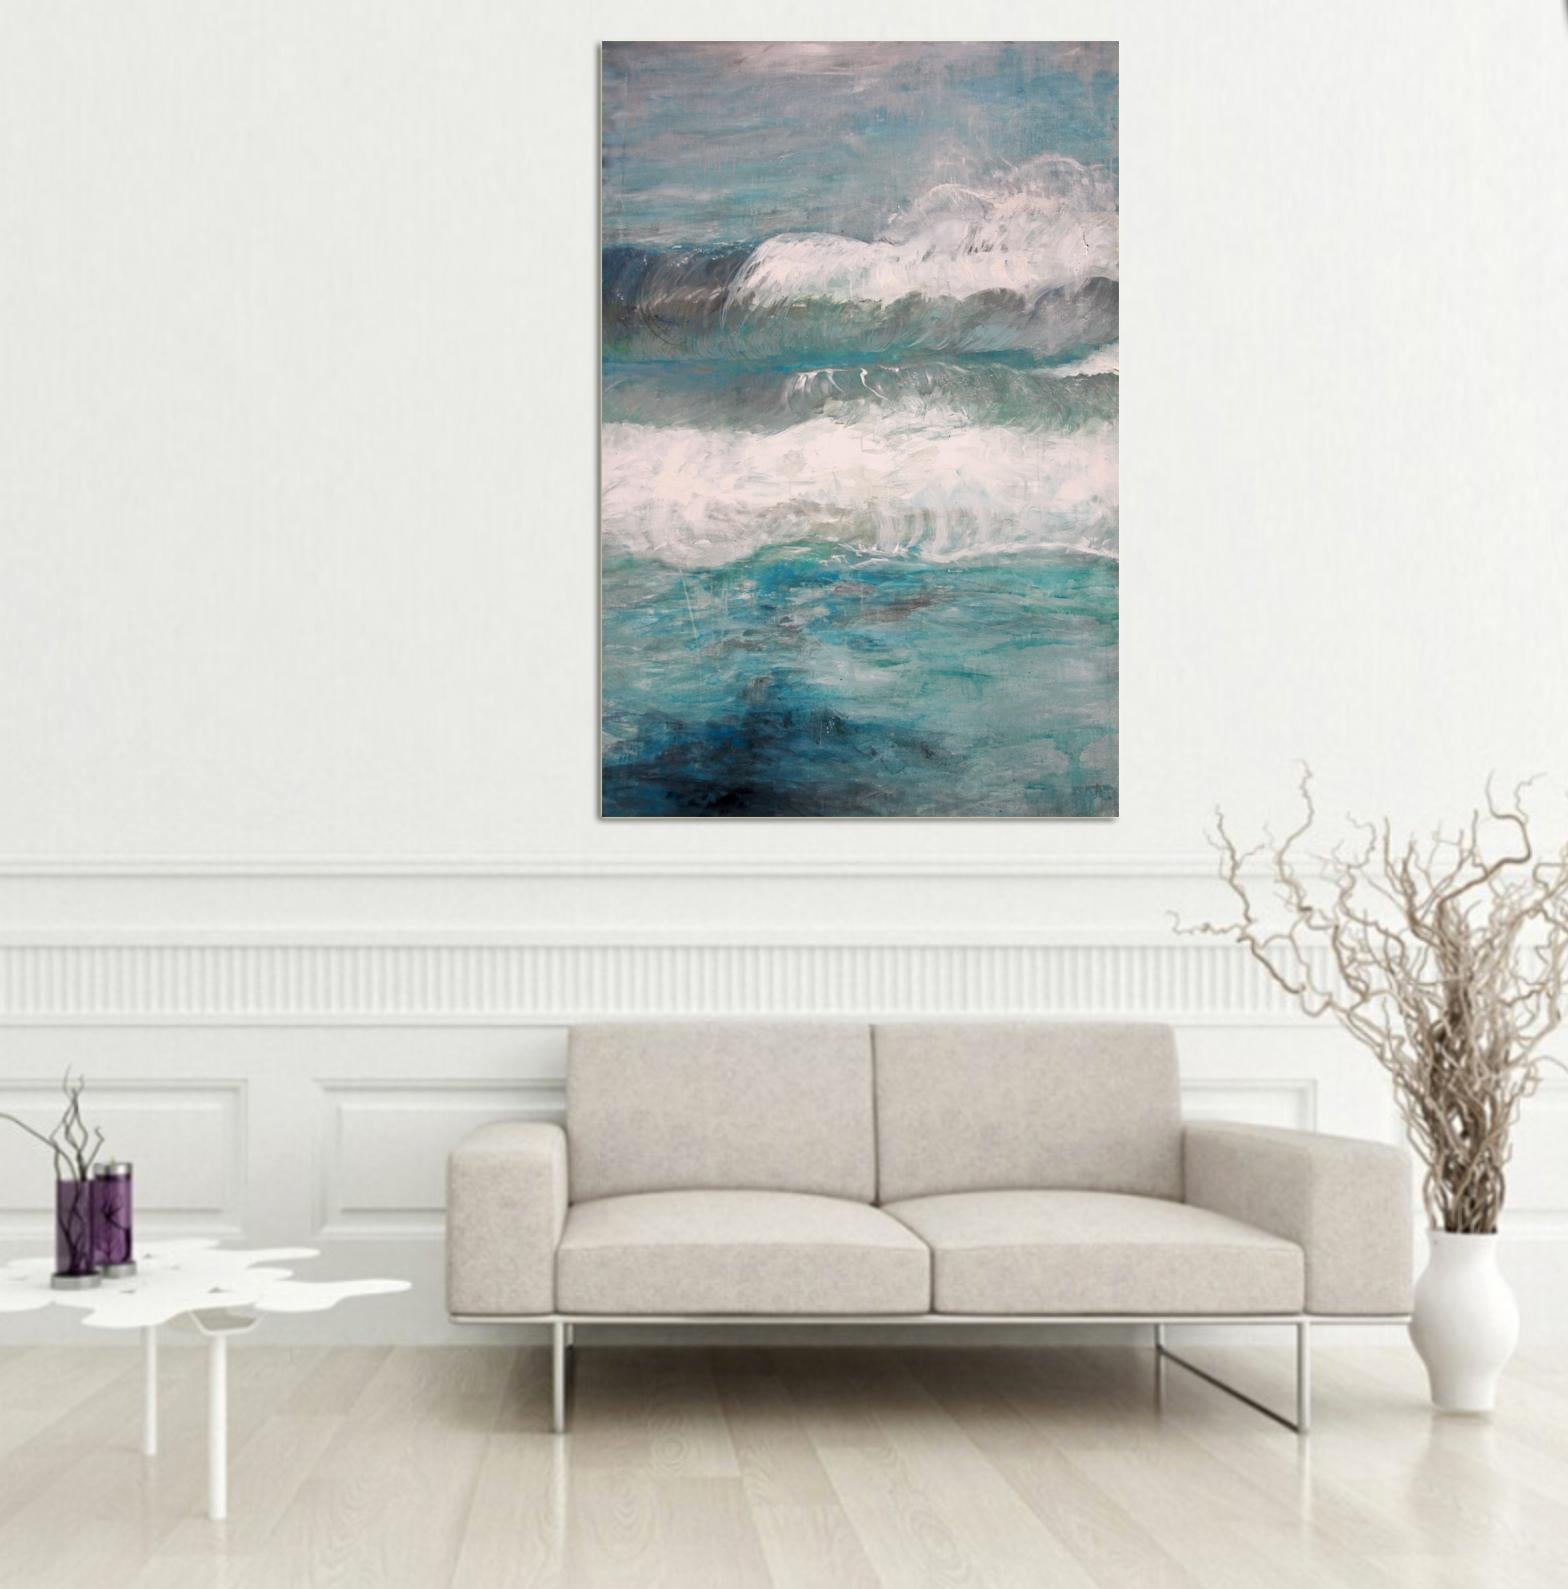 Beautiful abstract landscape painting of ocean waves crashing by painter Bettina Bohn.
This contemporary abstract painting brings in nature with a mesmerizing energy.

A perfect piece for modern interiors that want to bring in the spirit of living